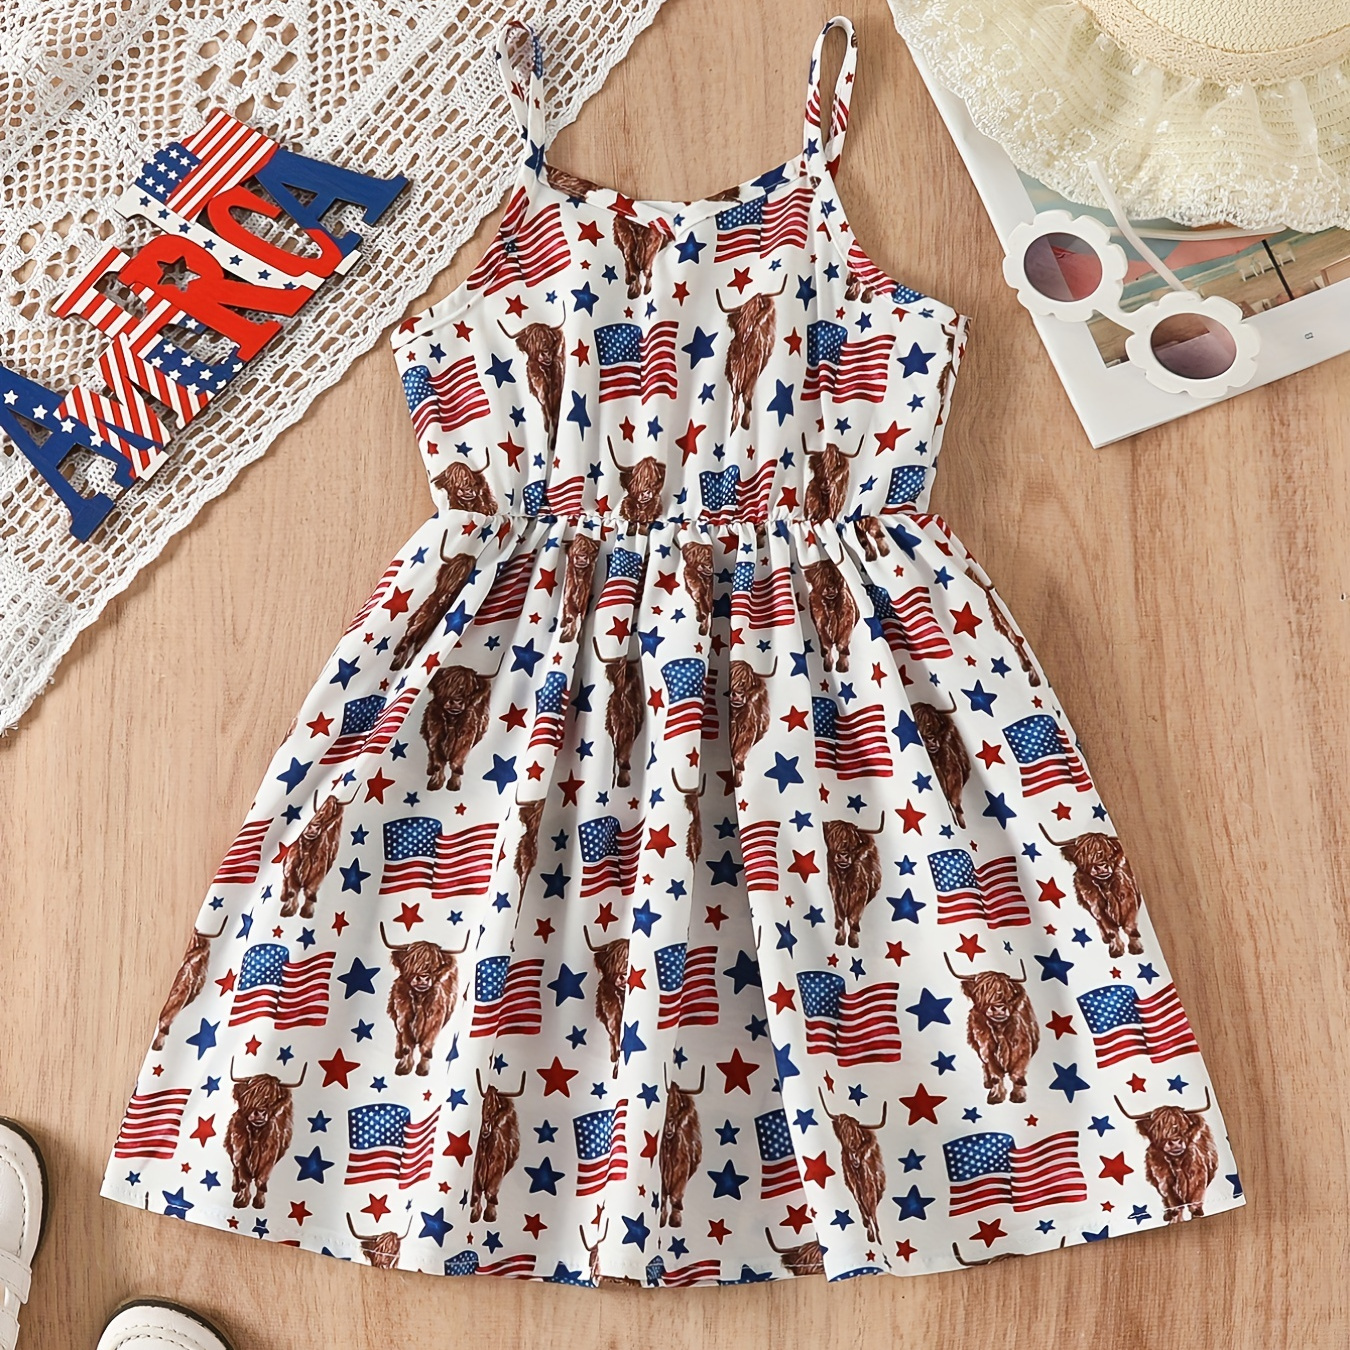 

Girls Strappy/ Sundress With Cute Cow & Usa Flags Full Print Fashion Casual Comfortable Tunic Dress Cow Girl Party Dress 4th Of July Girls Outfit